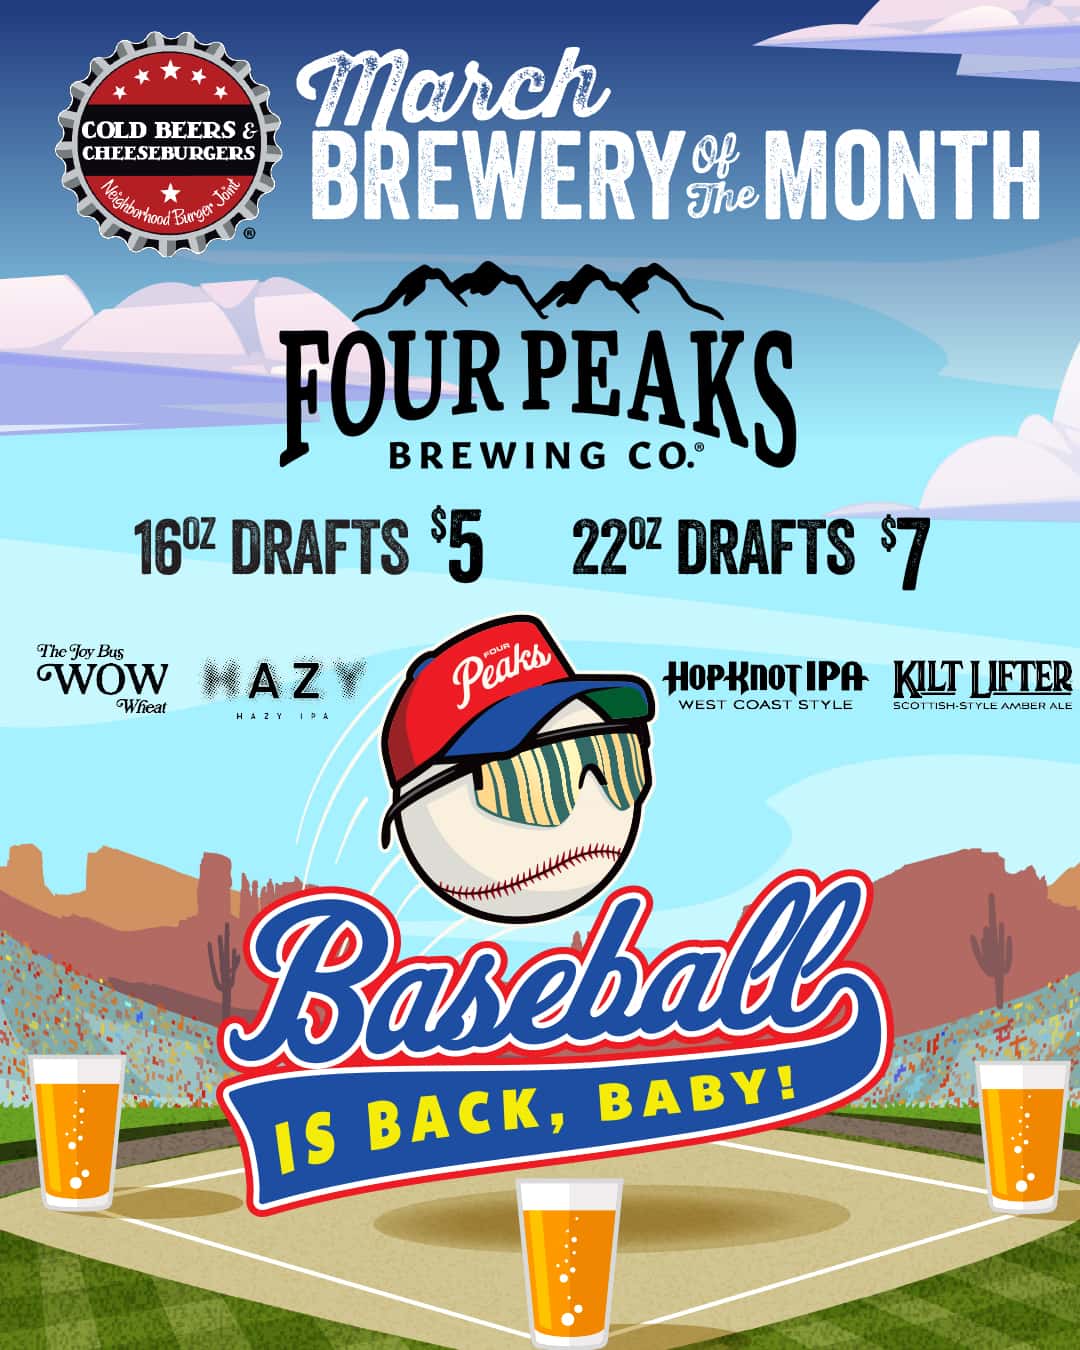 Four Peaks Brewery of the Month